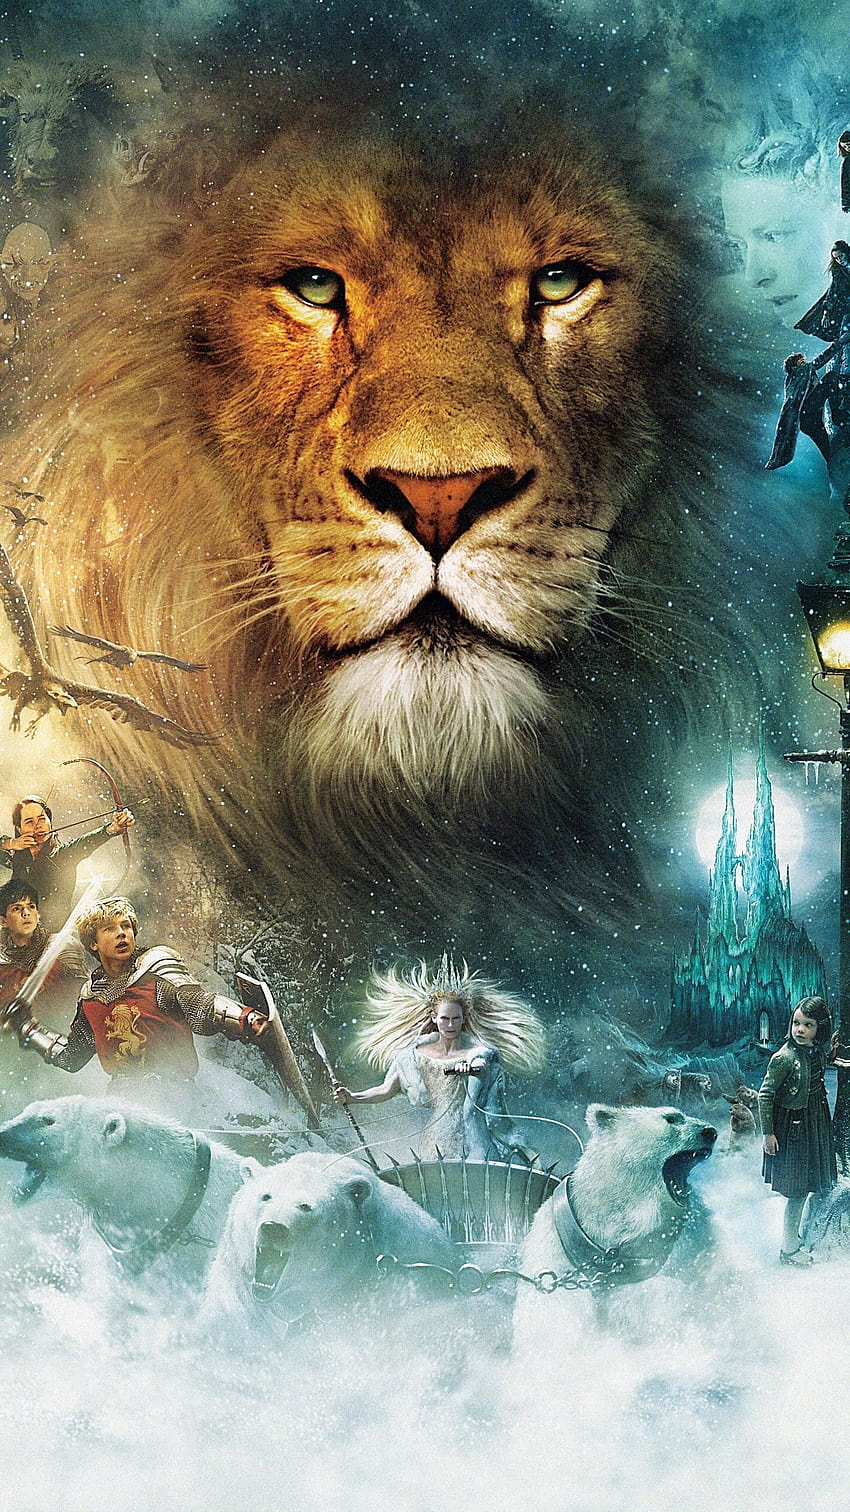 Movie The Chronicles of Narnia: The Voyage of the Dawn Treader HD Wallpaper